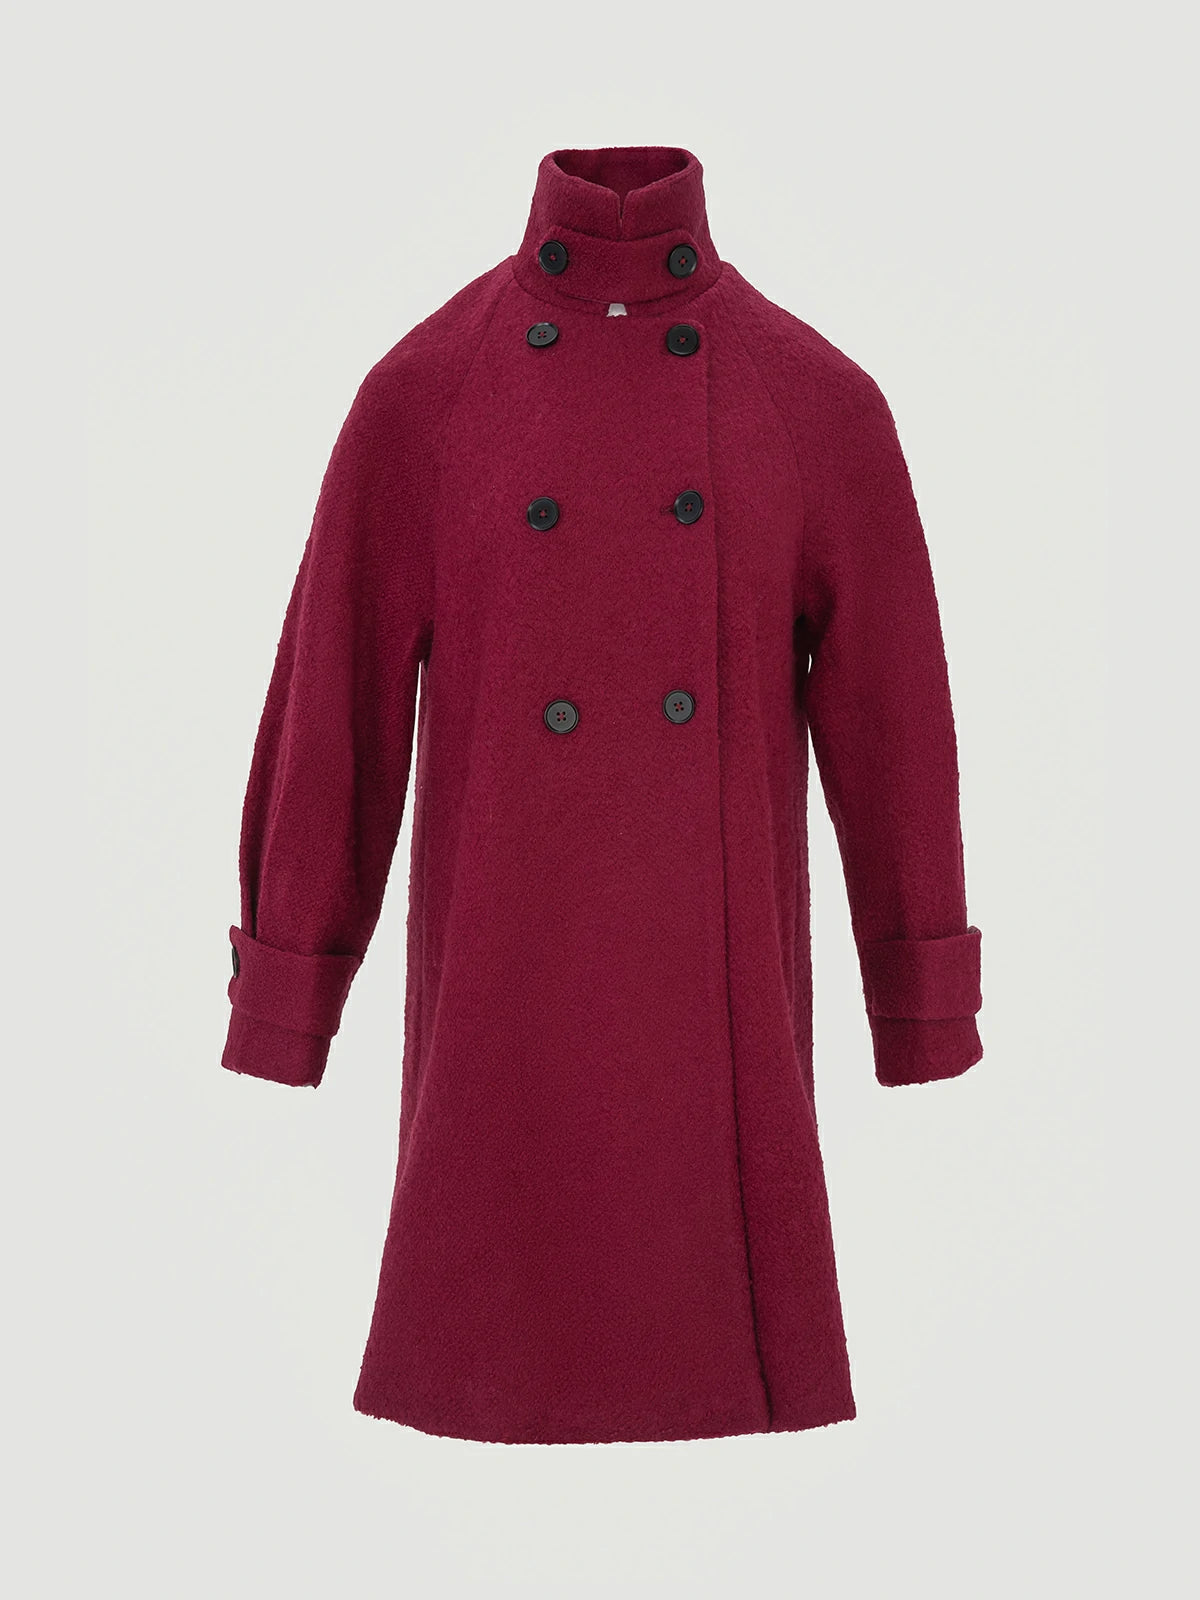 Vintage Collared Double-breasted Wool Coat